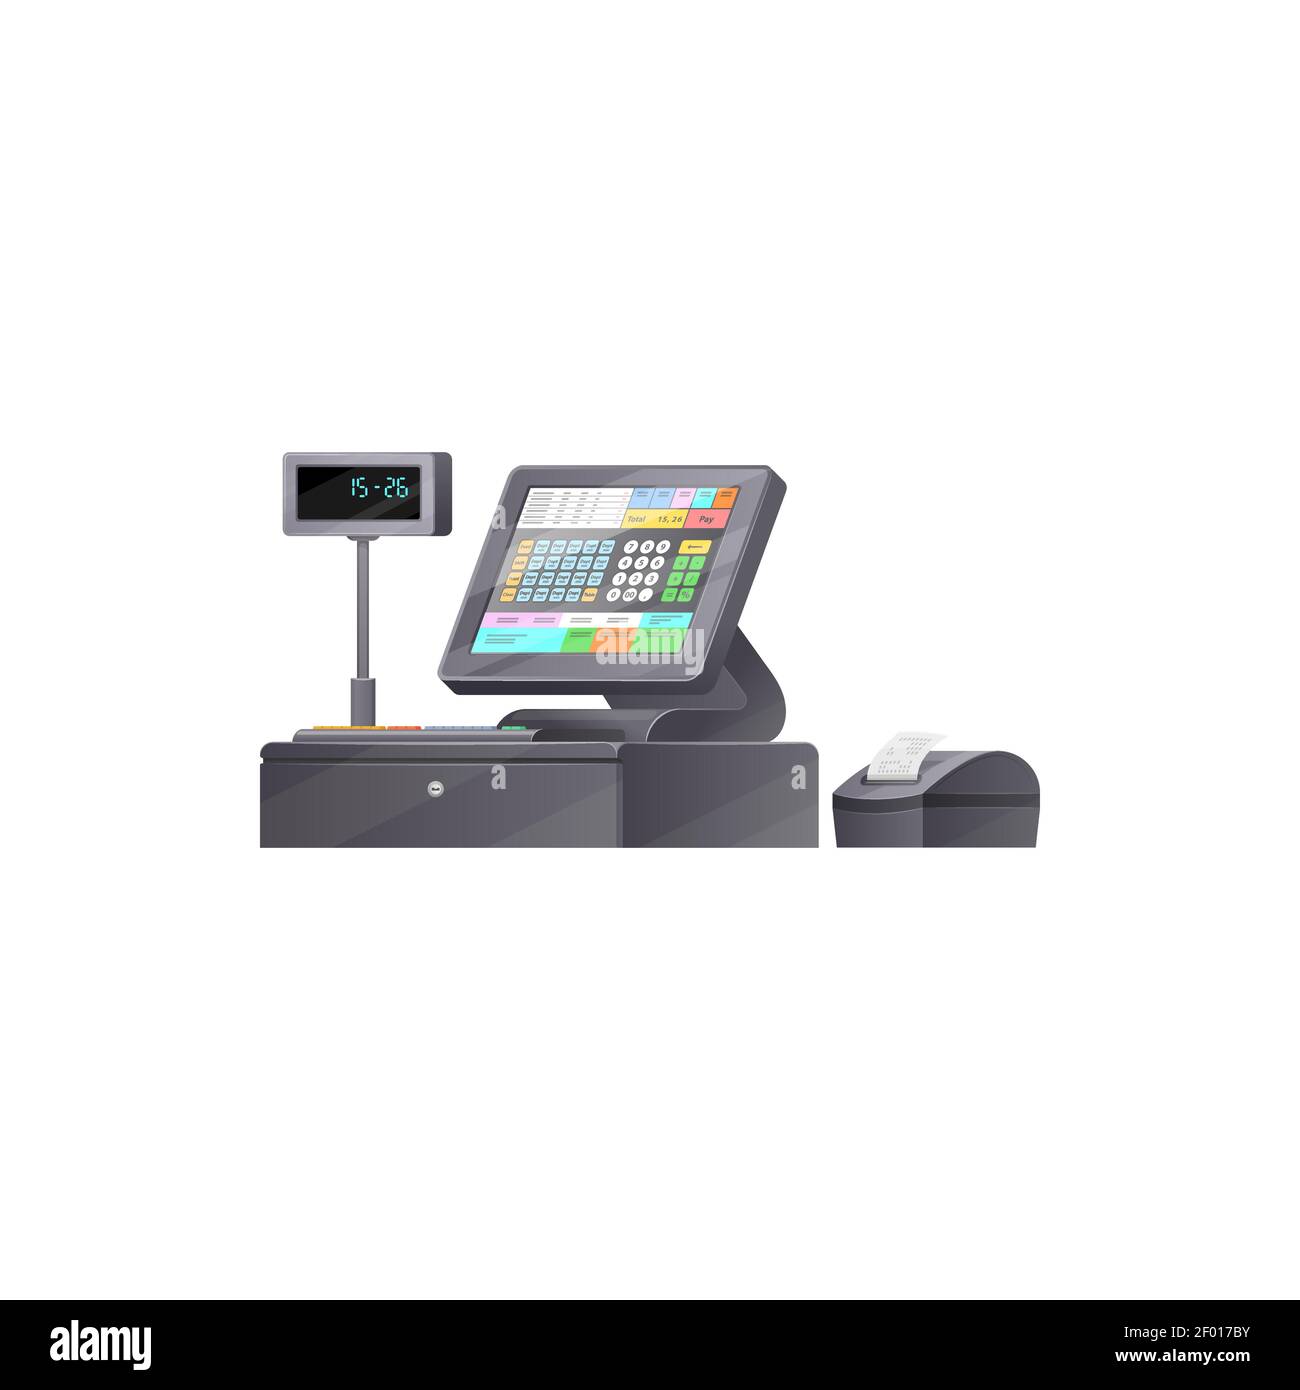 Electronic cash register isolated till device. Vector machine registering and calculating transactions at point of sale. Printer to print out receipts Stock Vector